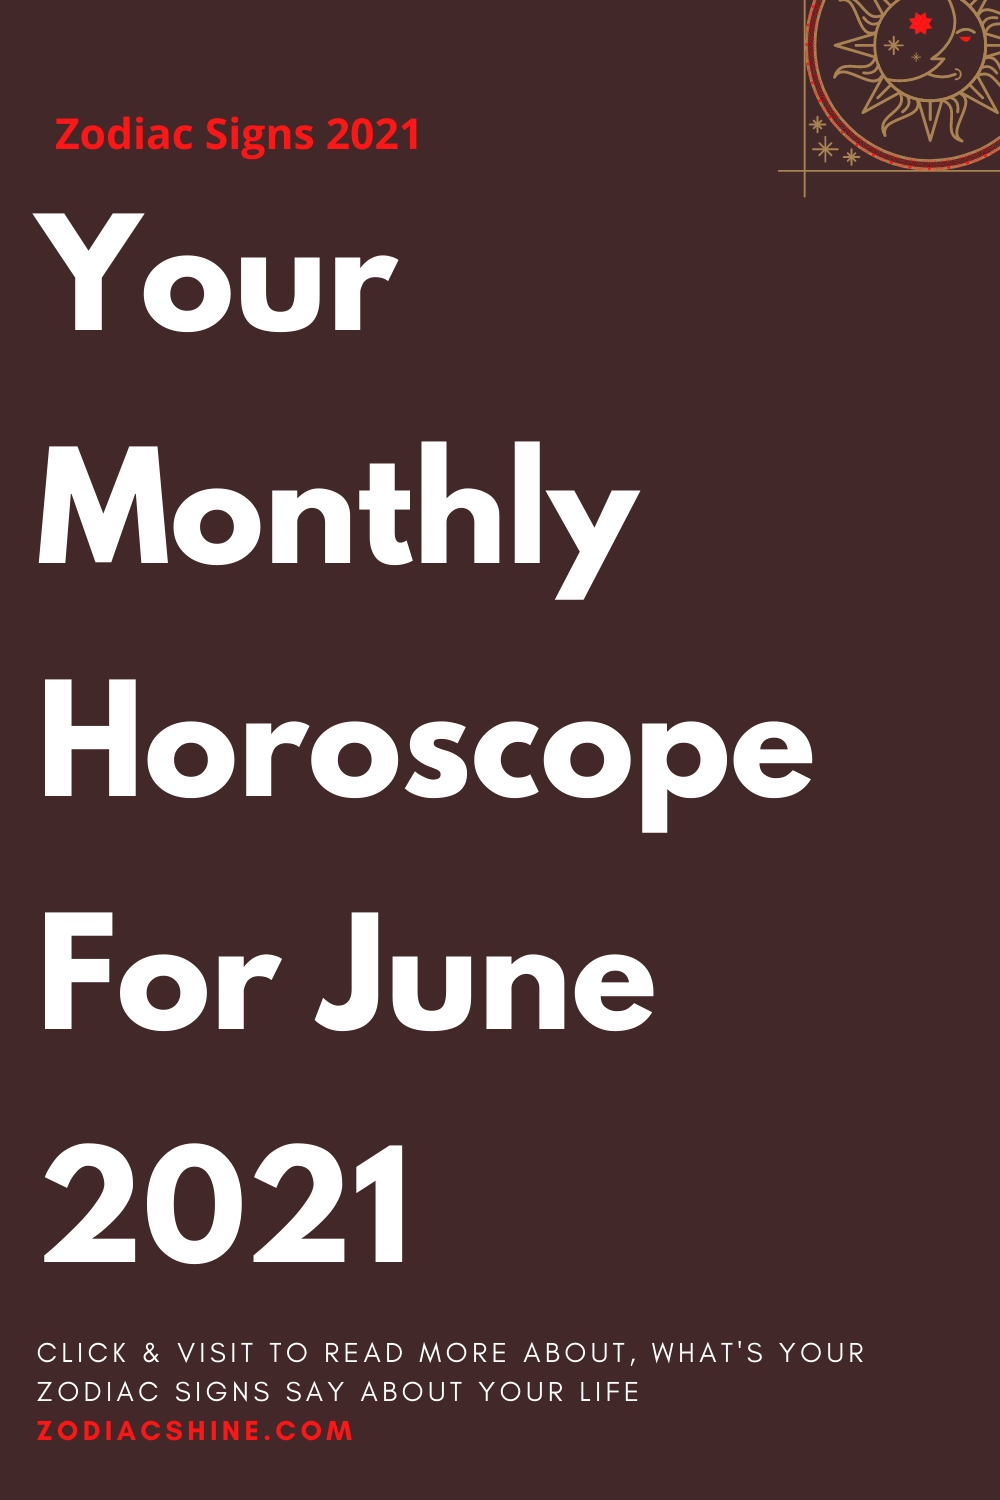 Your Monthly Horoscope For June 2021